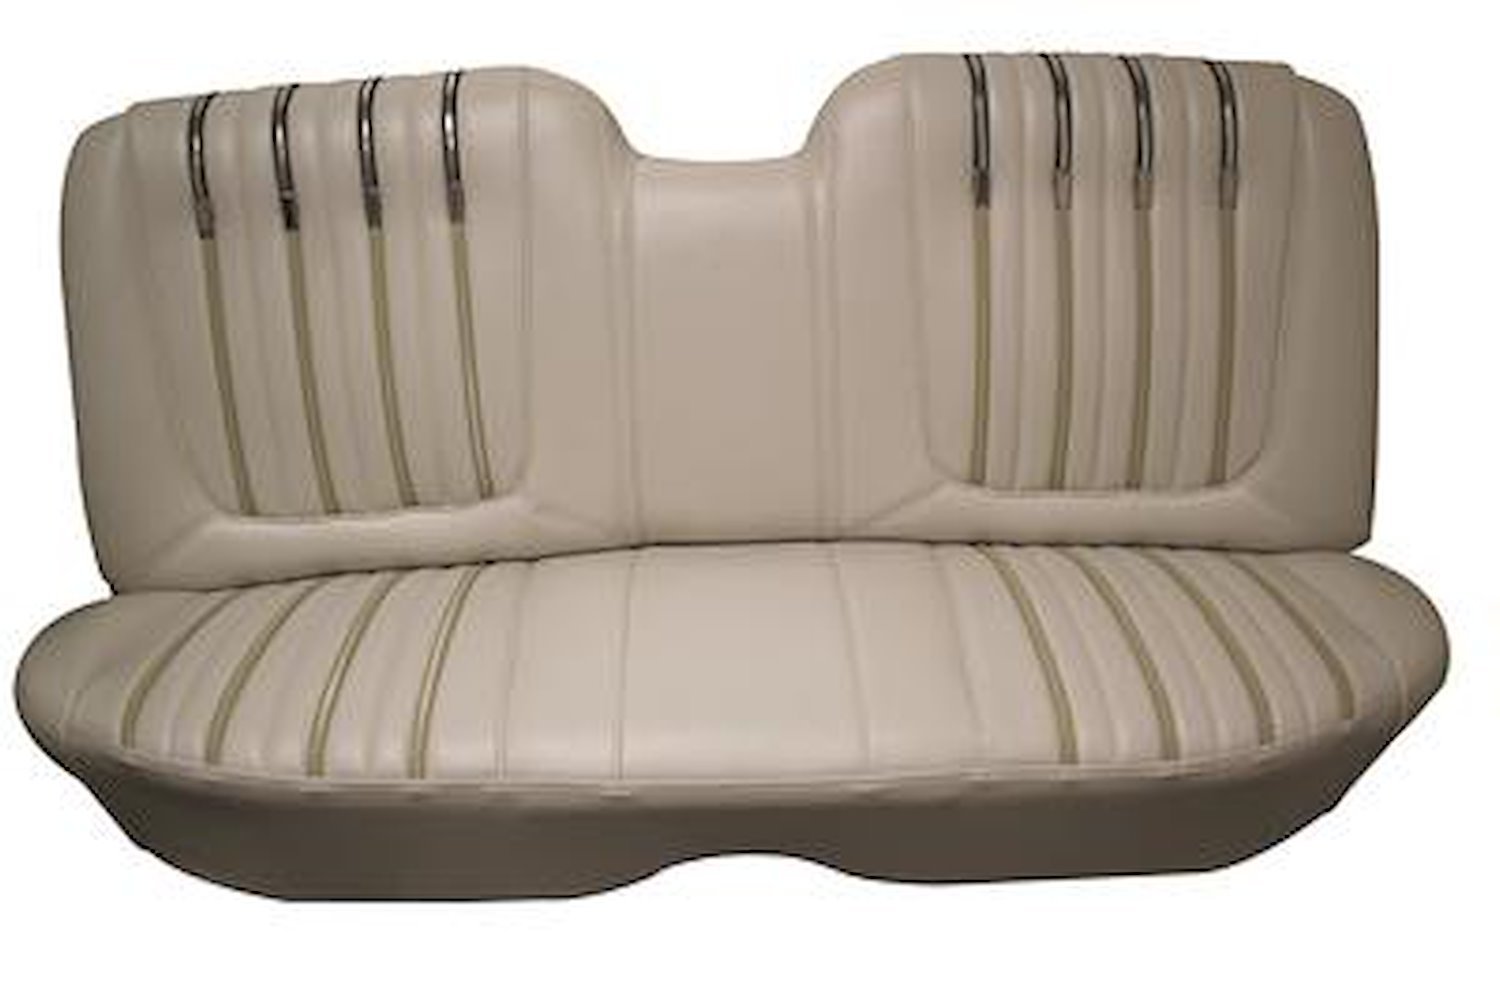 1963 Ford Galaxie 500XL 2-Door Fastback Interior Two-Tone Rear Bench Seat Upholstery Set